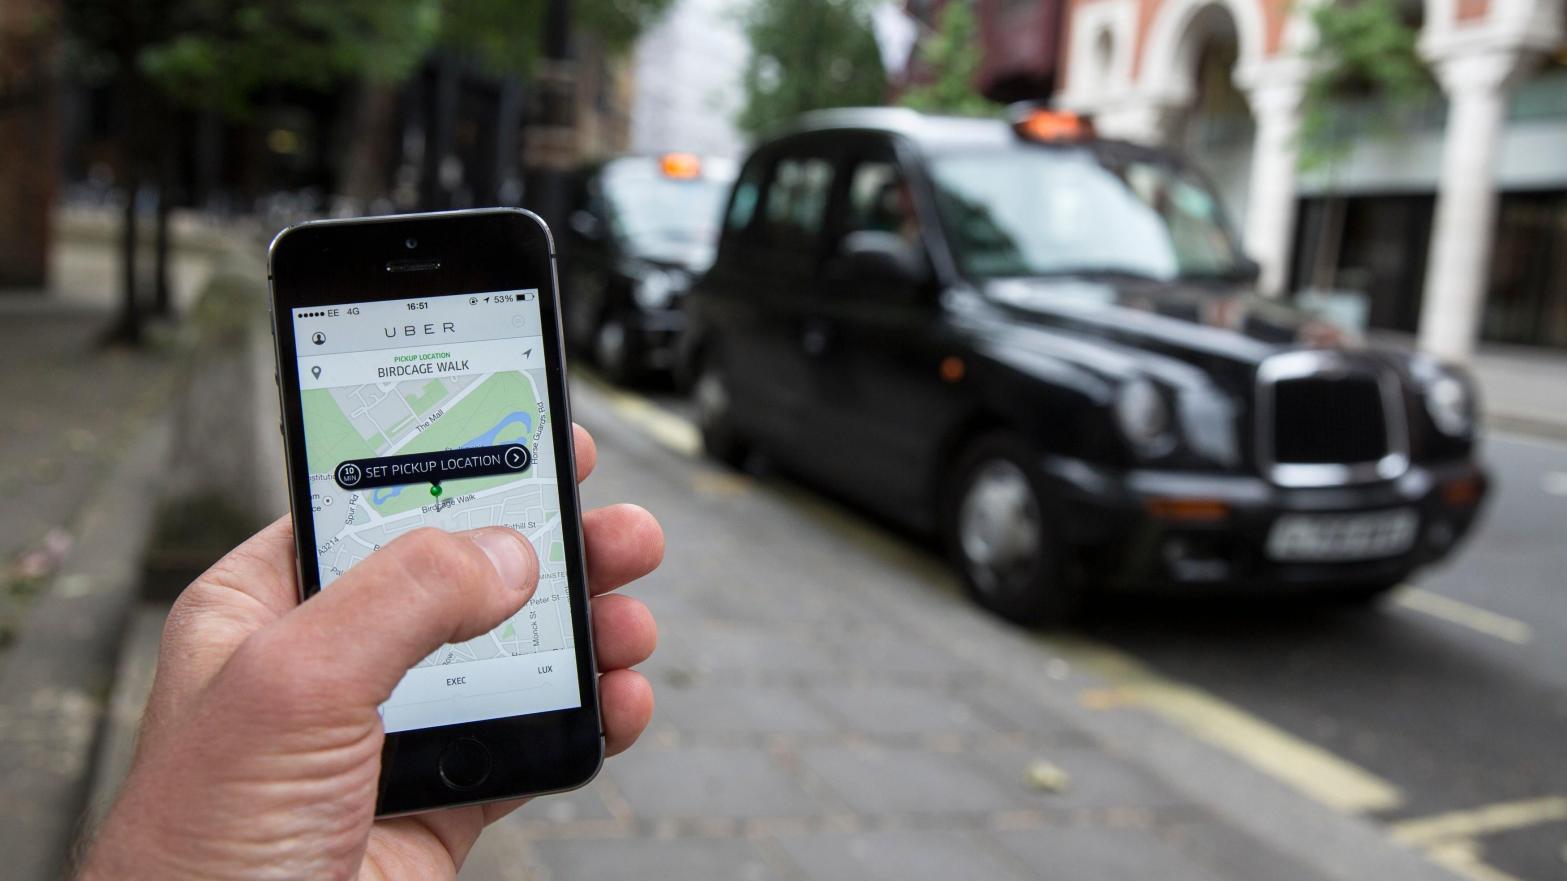 The city of London threatened to exile Uber over various safety concerns in 2017. (Image: Oli Scarff, Getty Images)